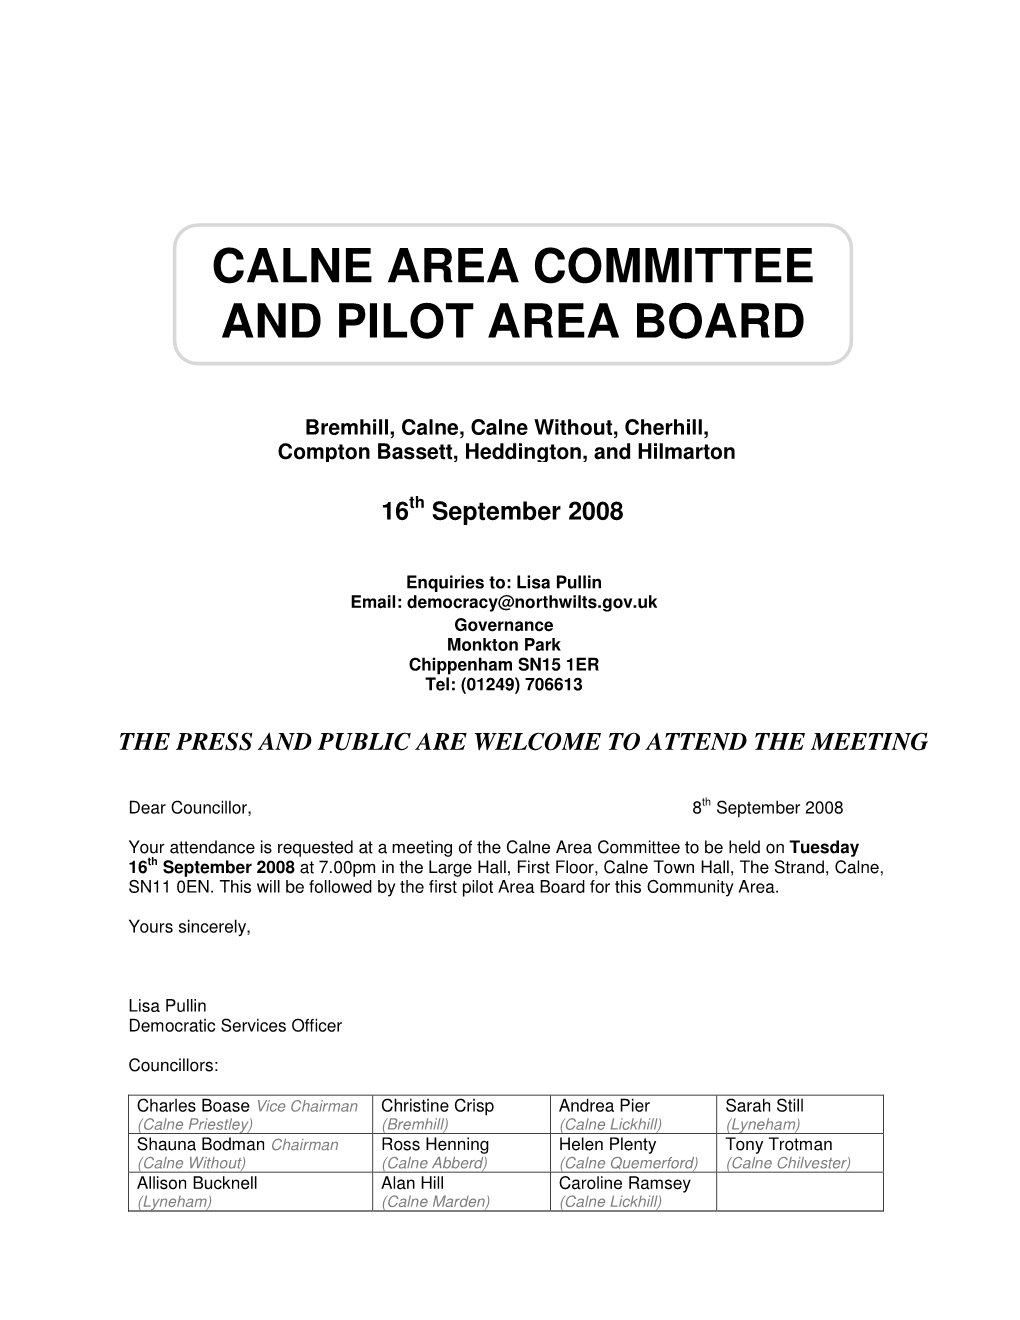 Calne Area Committee and Pilot Area